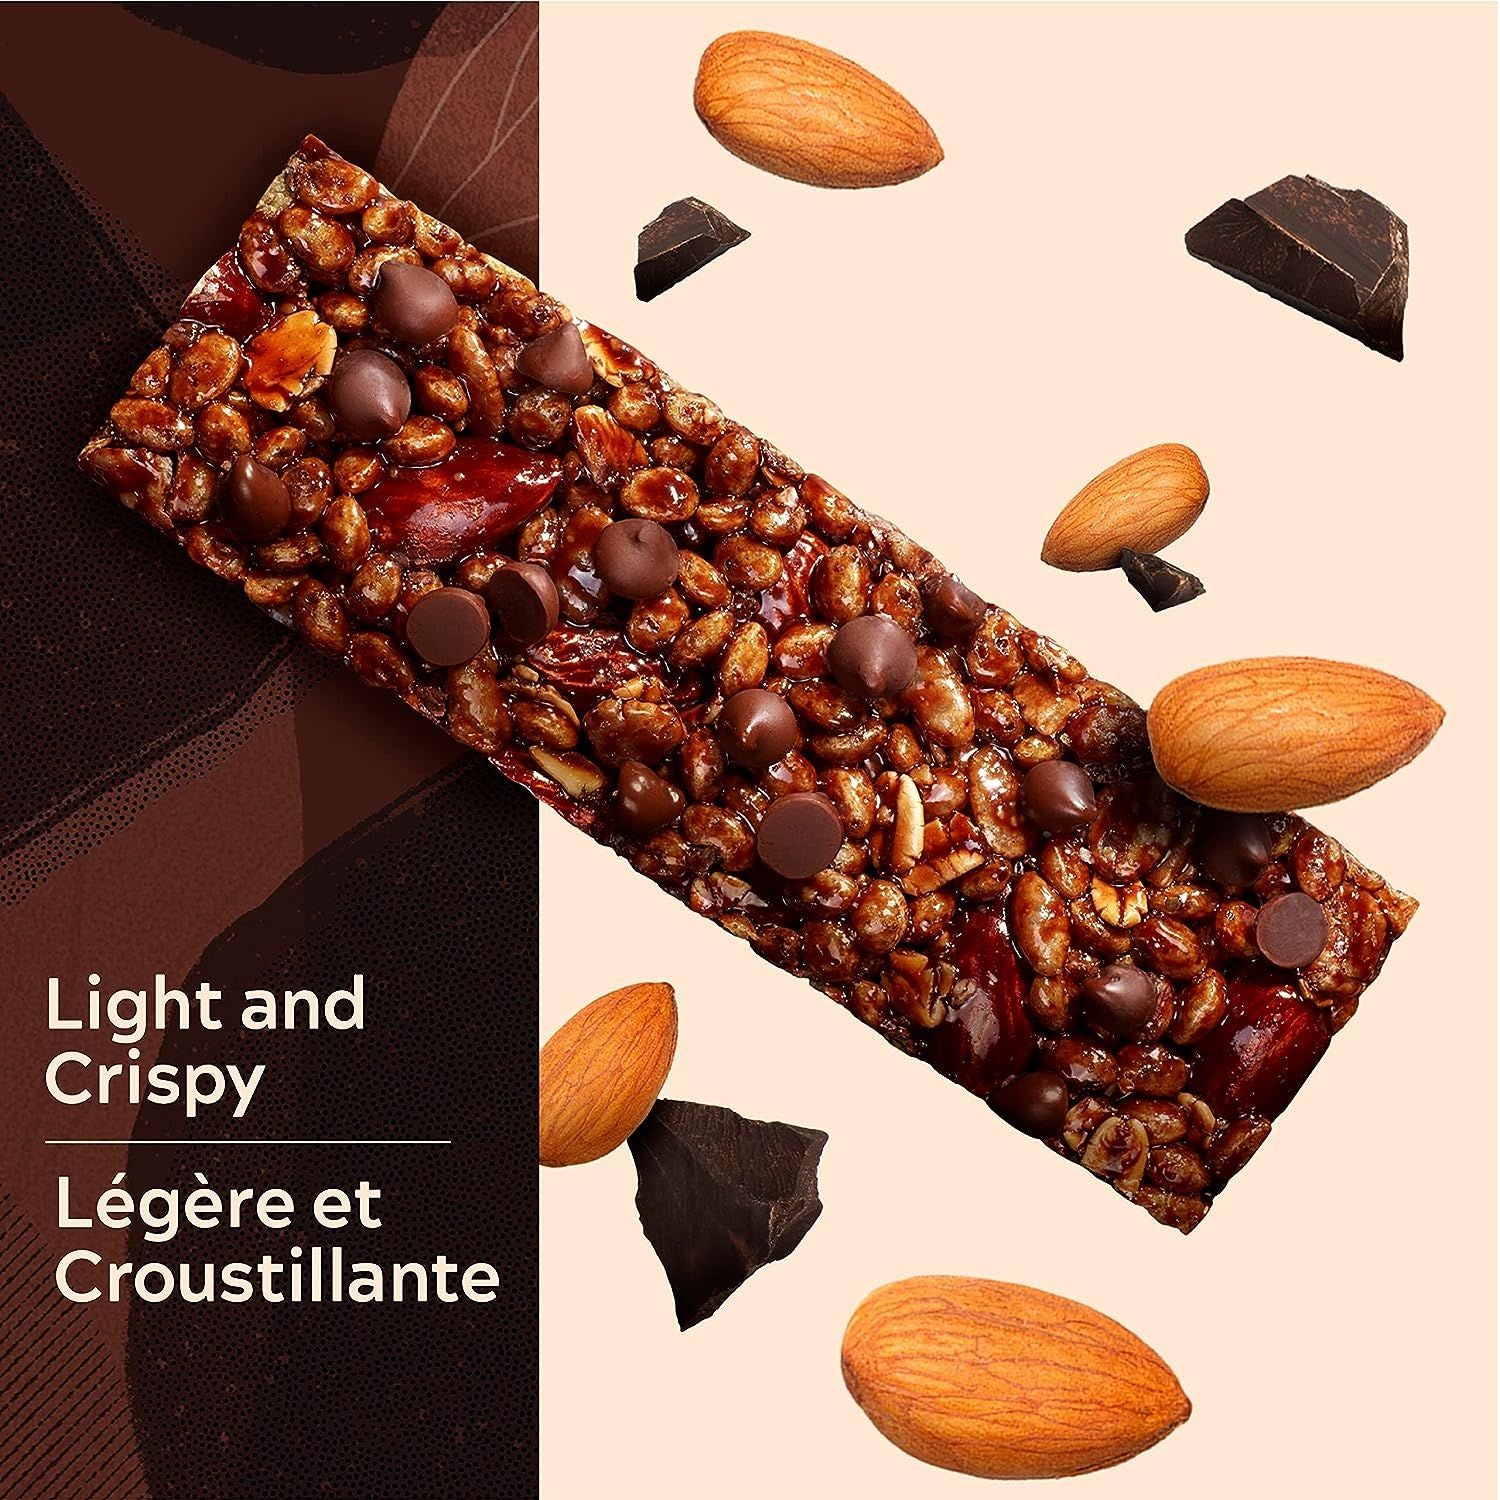 SimplyProtein Protein Snack Bar (1 bar) Protein Snacks Peanut Butter Chocolate,Lemon Coconut,Dark Chocolate Almond,Chocolate Coconut,Dark Chocolate Salted Caramel SimplyProtein